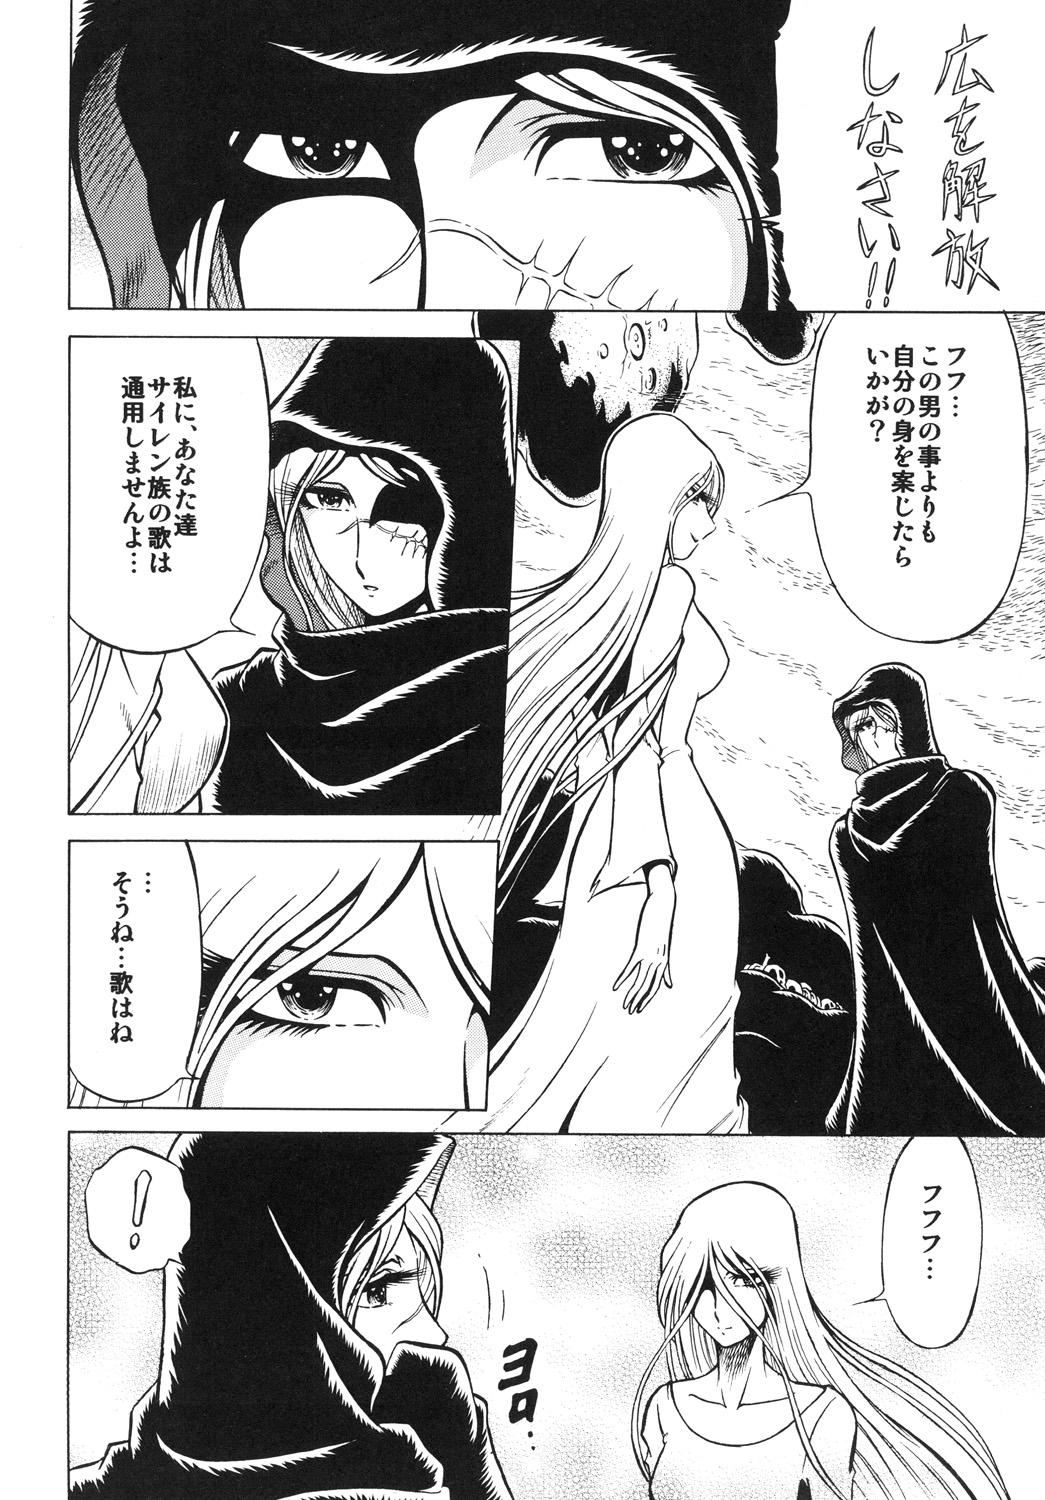 French NightHead+2 - Space pirate captain harlock Bizarre - Page 11